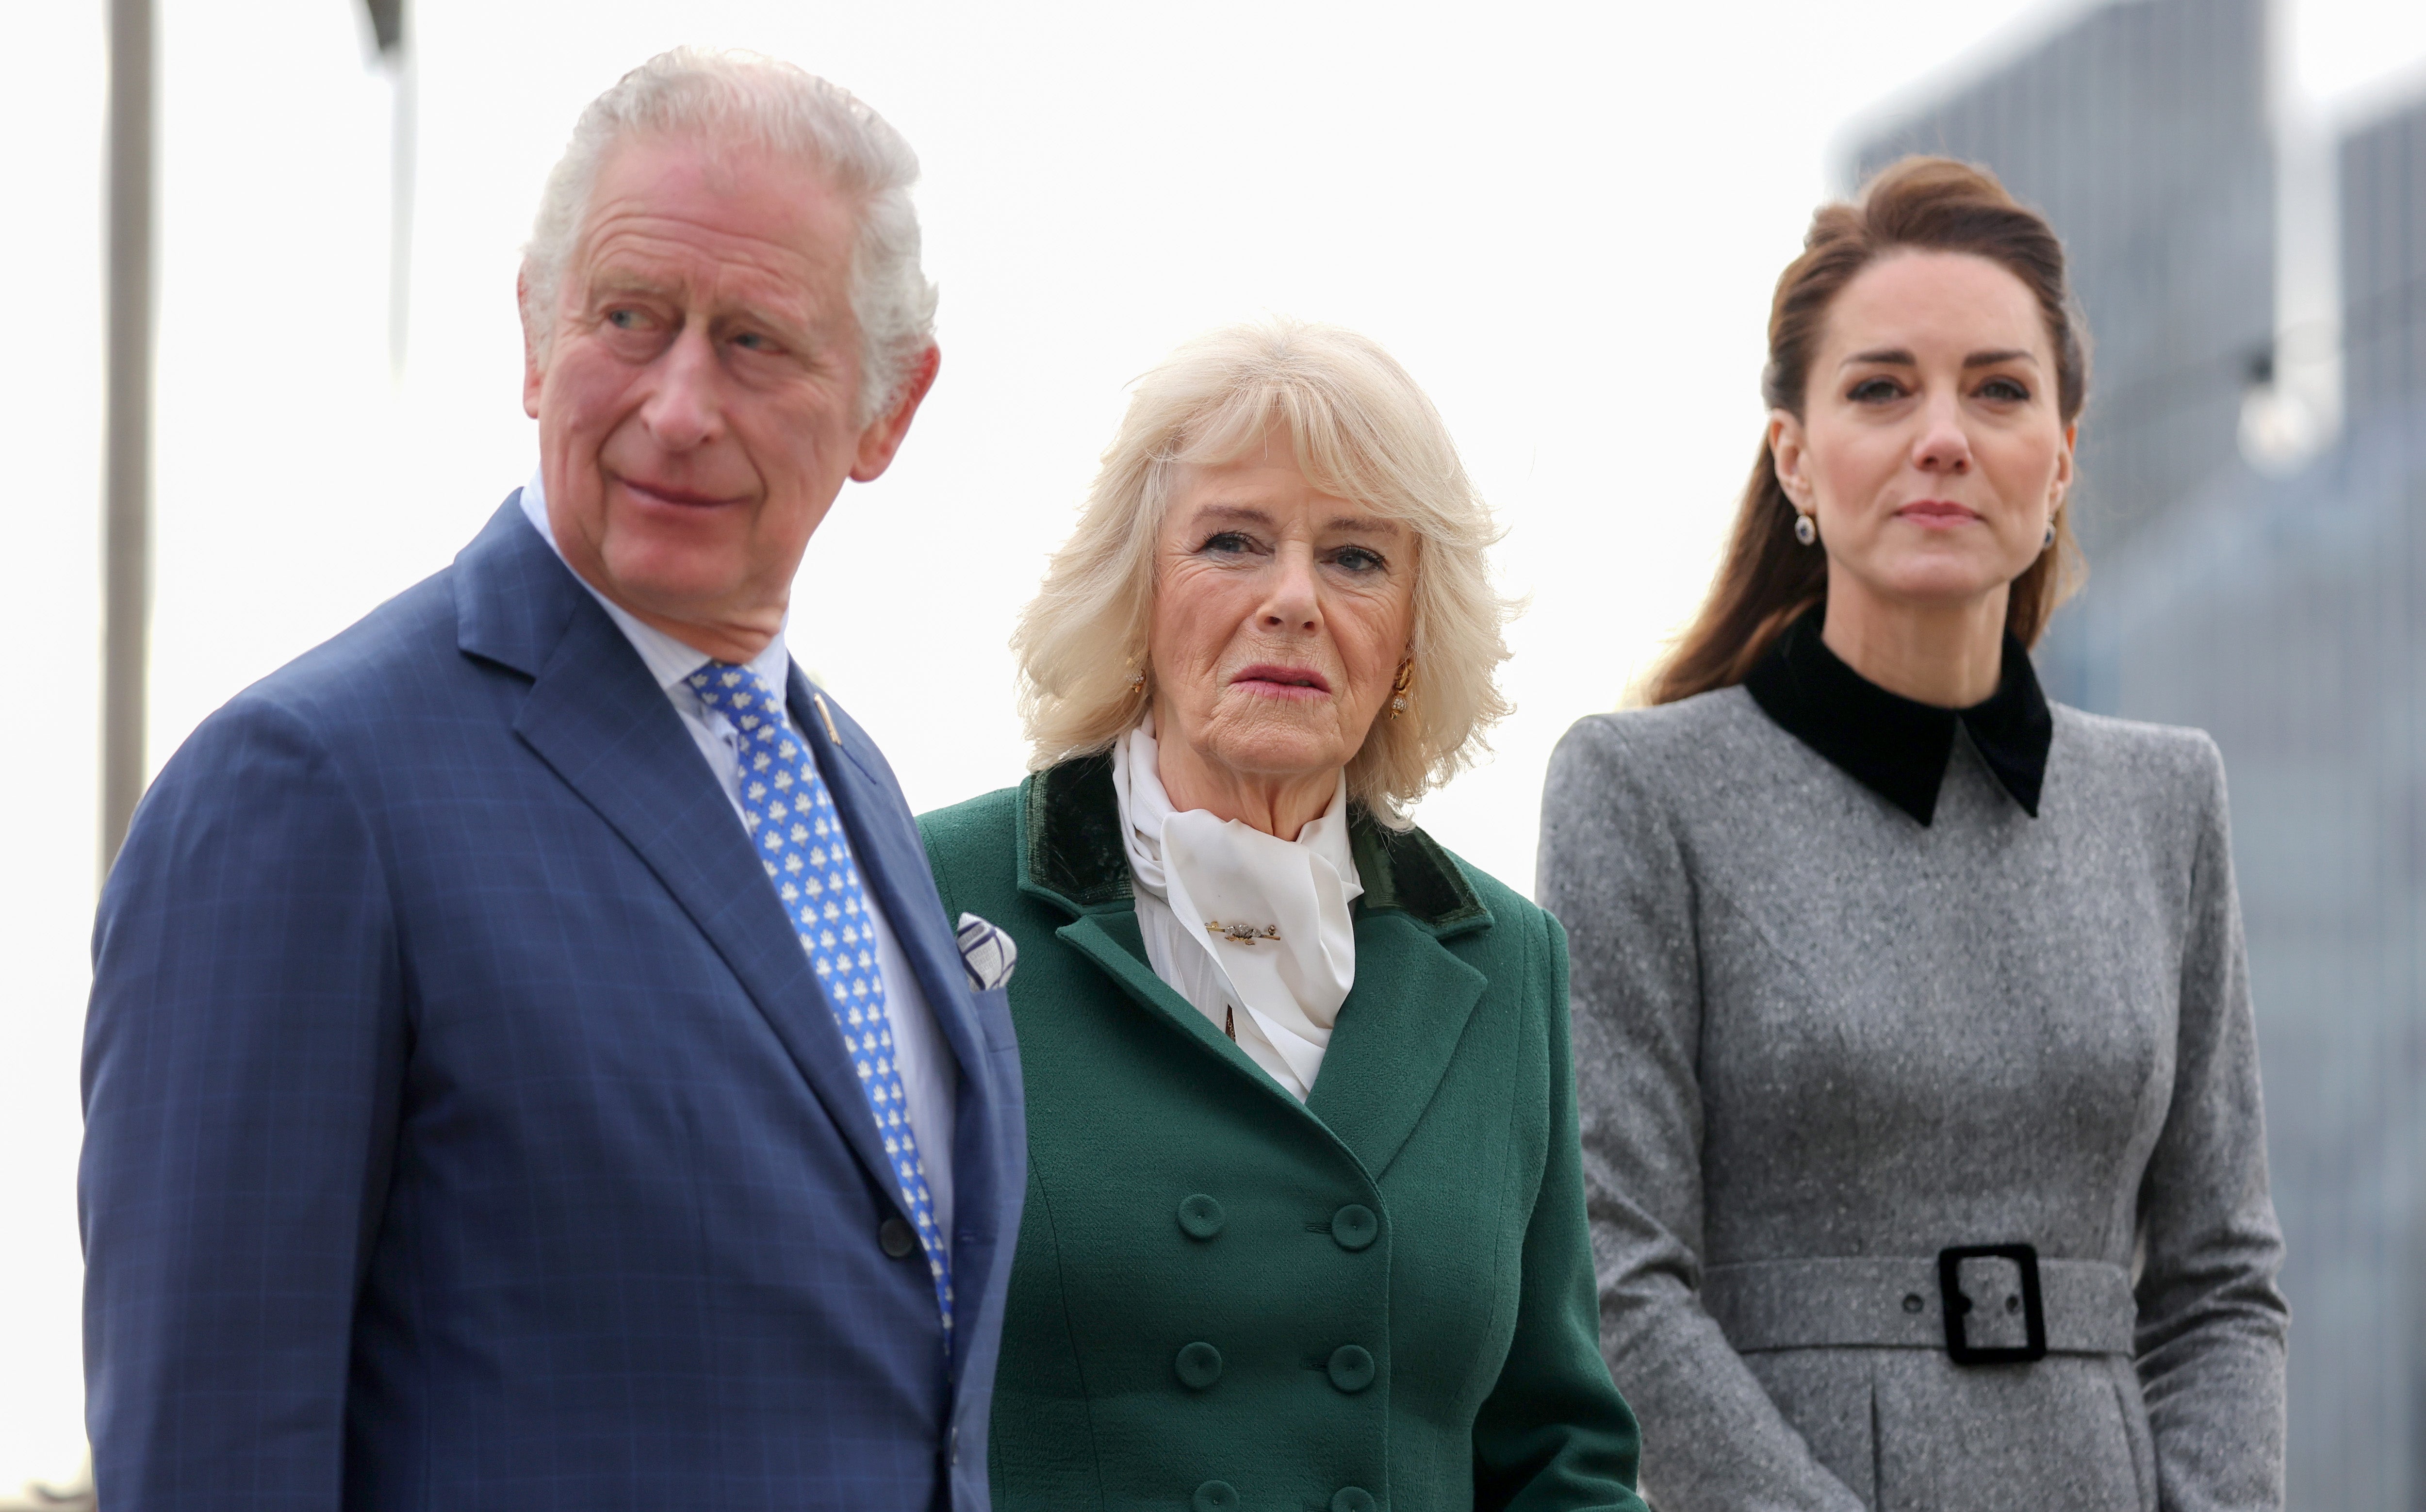 The King and the Princess of Wales are stepping back from public engagements to undergo treatment